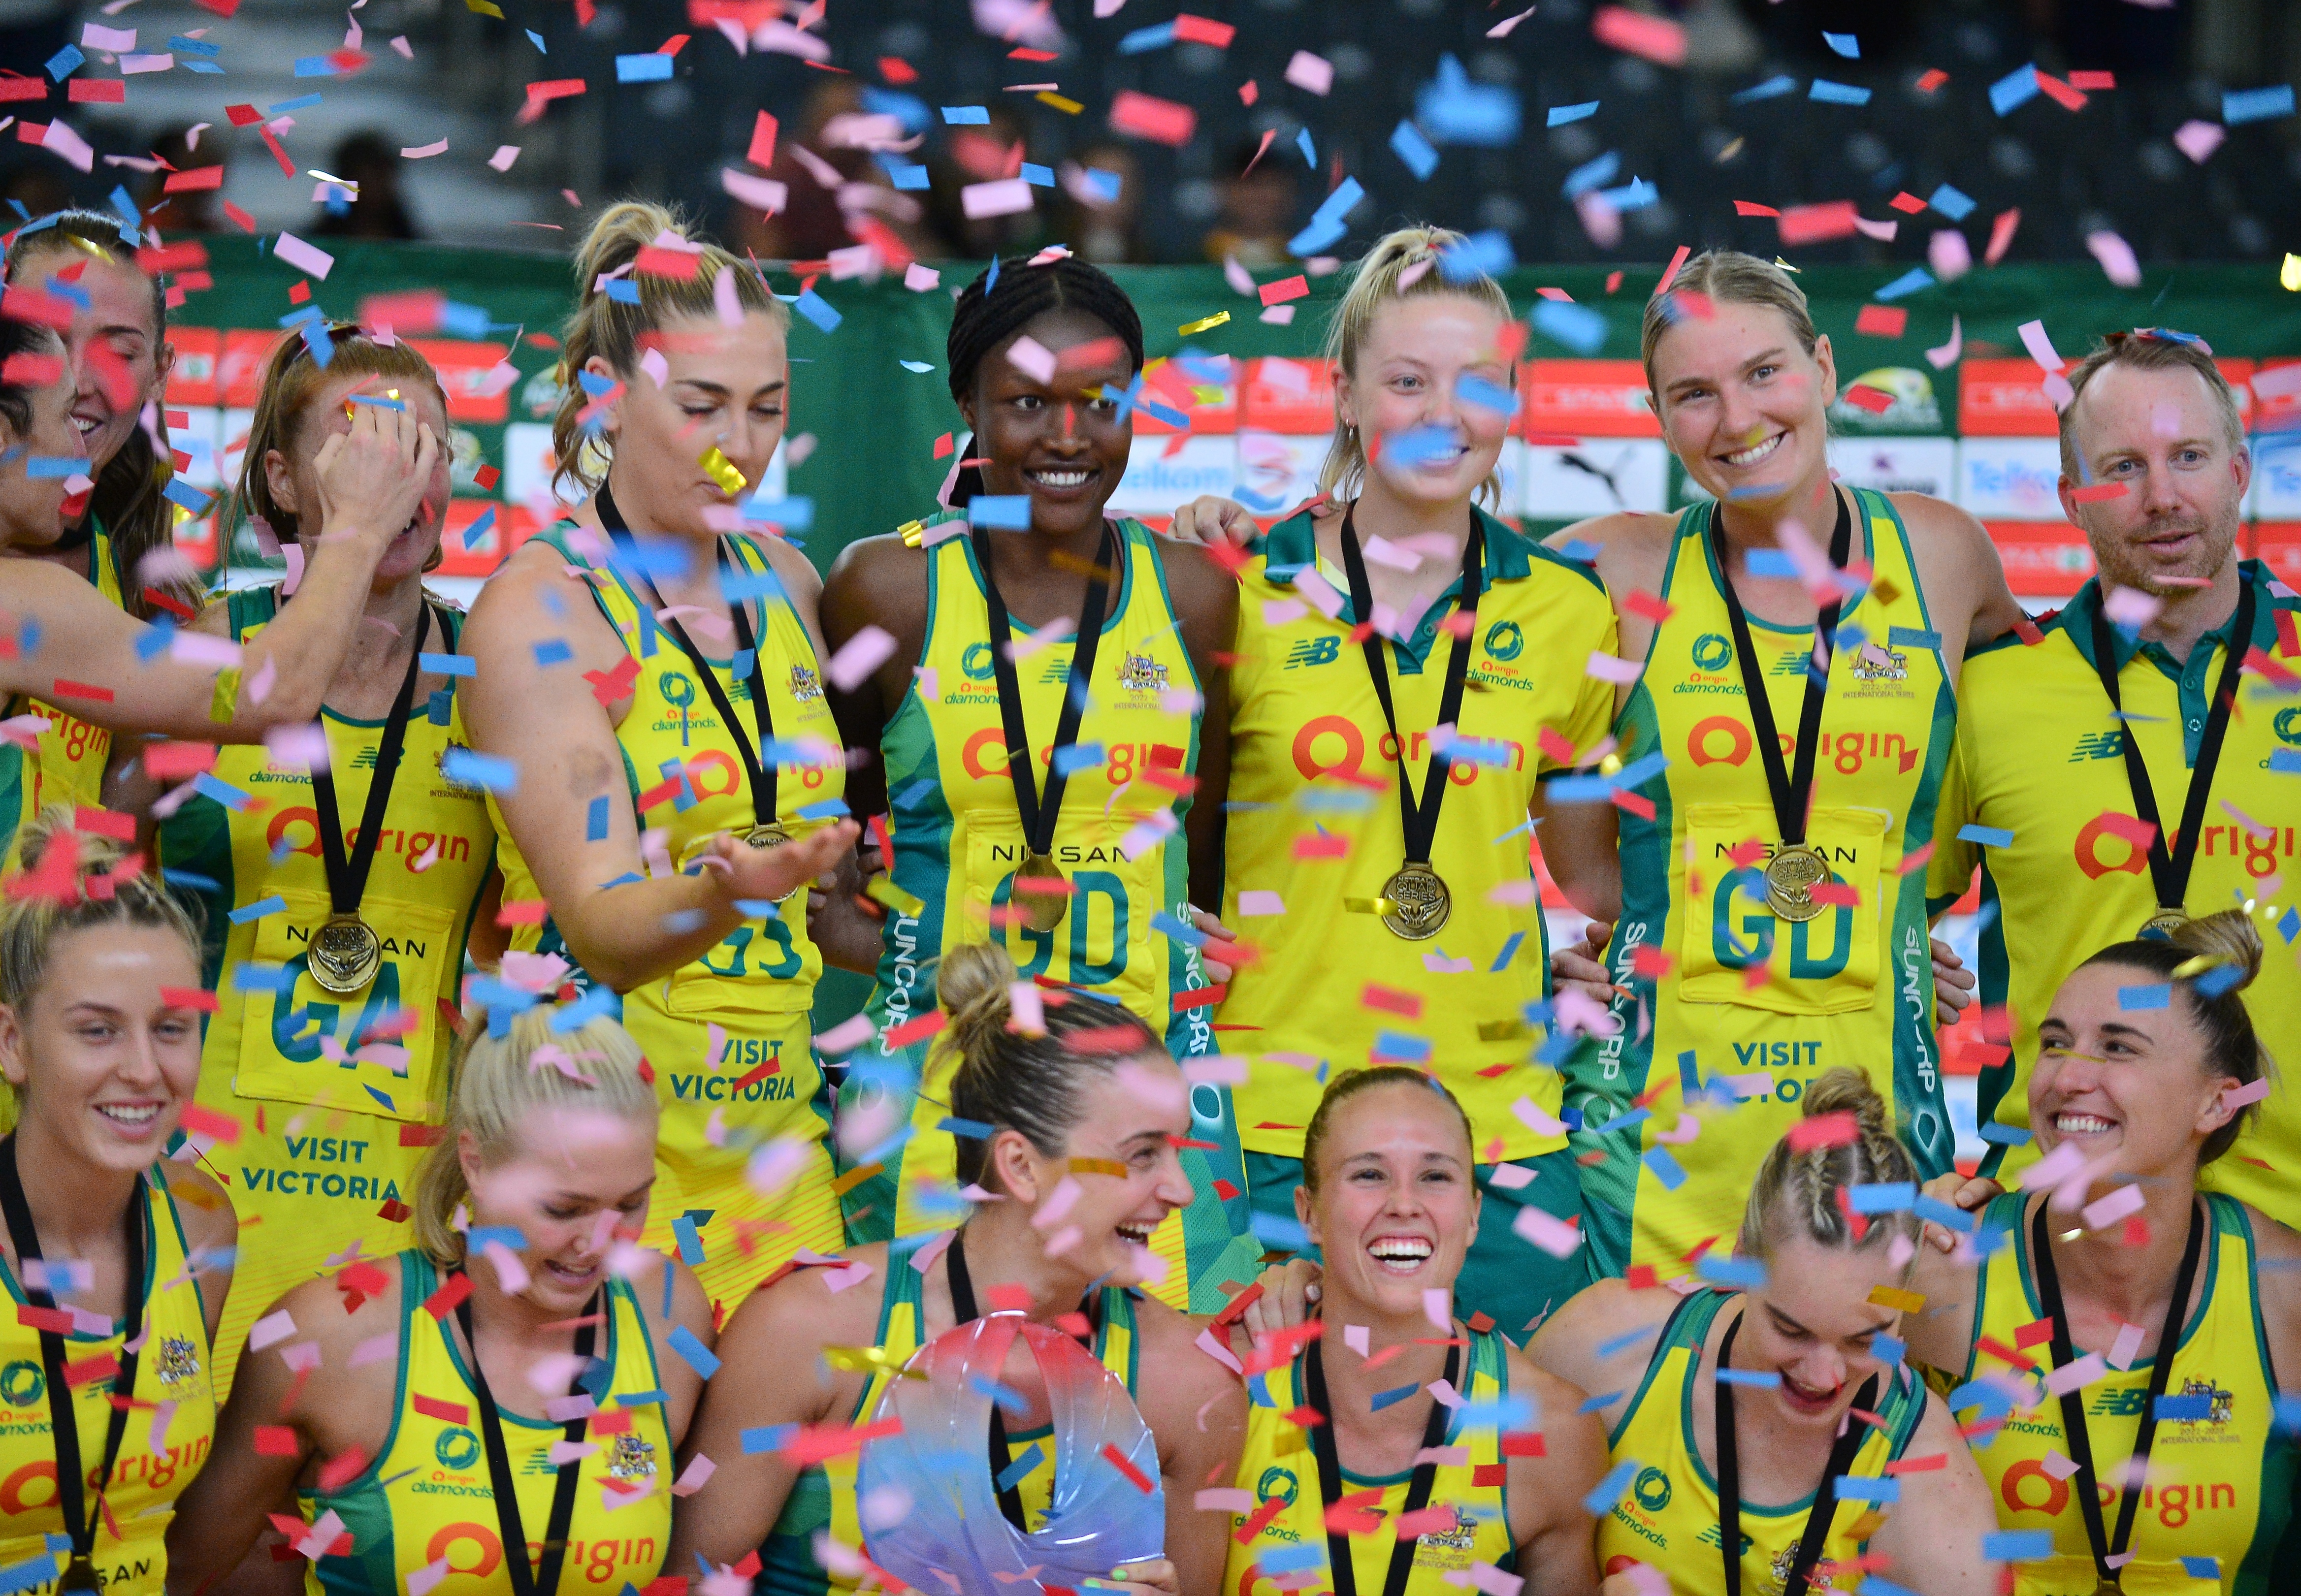 Liz Watson (Captain) of Australia with the trophy as Team Australia celebrates winning during the post match presentation after the Netball Quad Series final match between Australia and New Zealand at Cape Town International Convention Centre on January 25, 2023 in Cape Town, South Africa. (Photo by Grant Pitcher/Gallo Images/Getty Images)